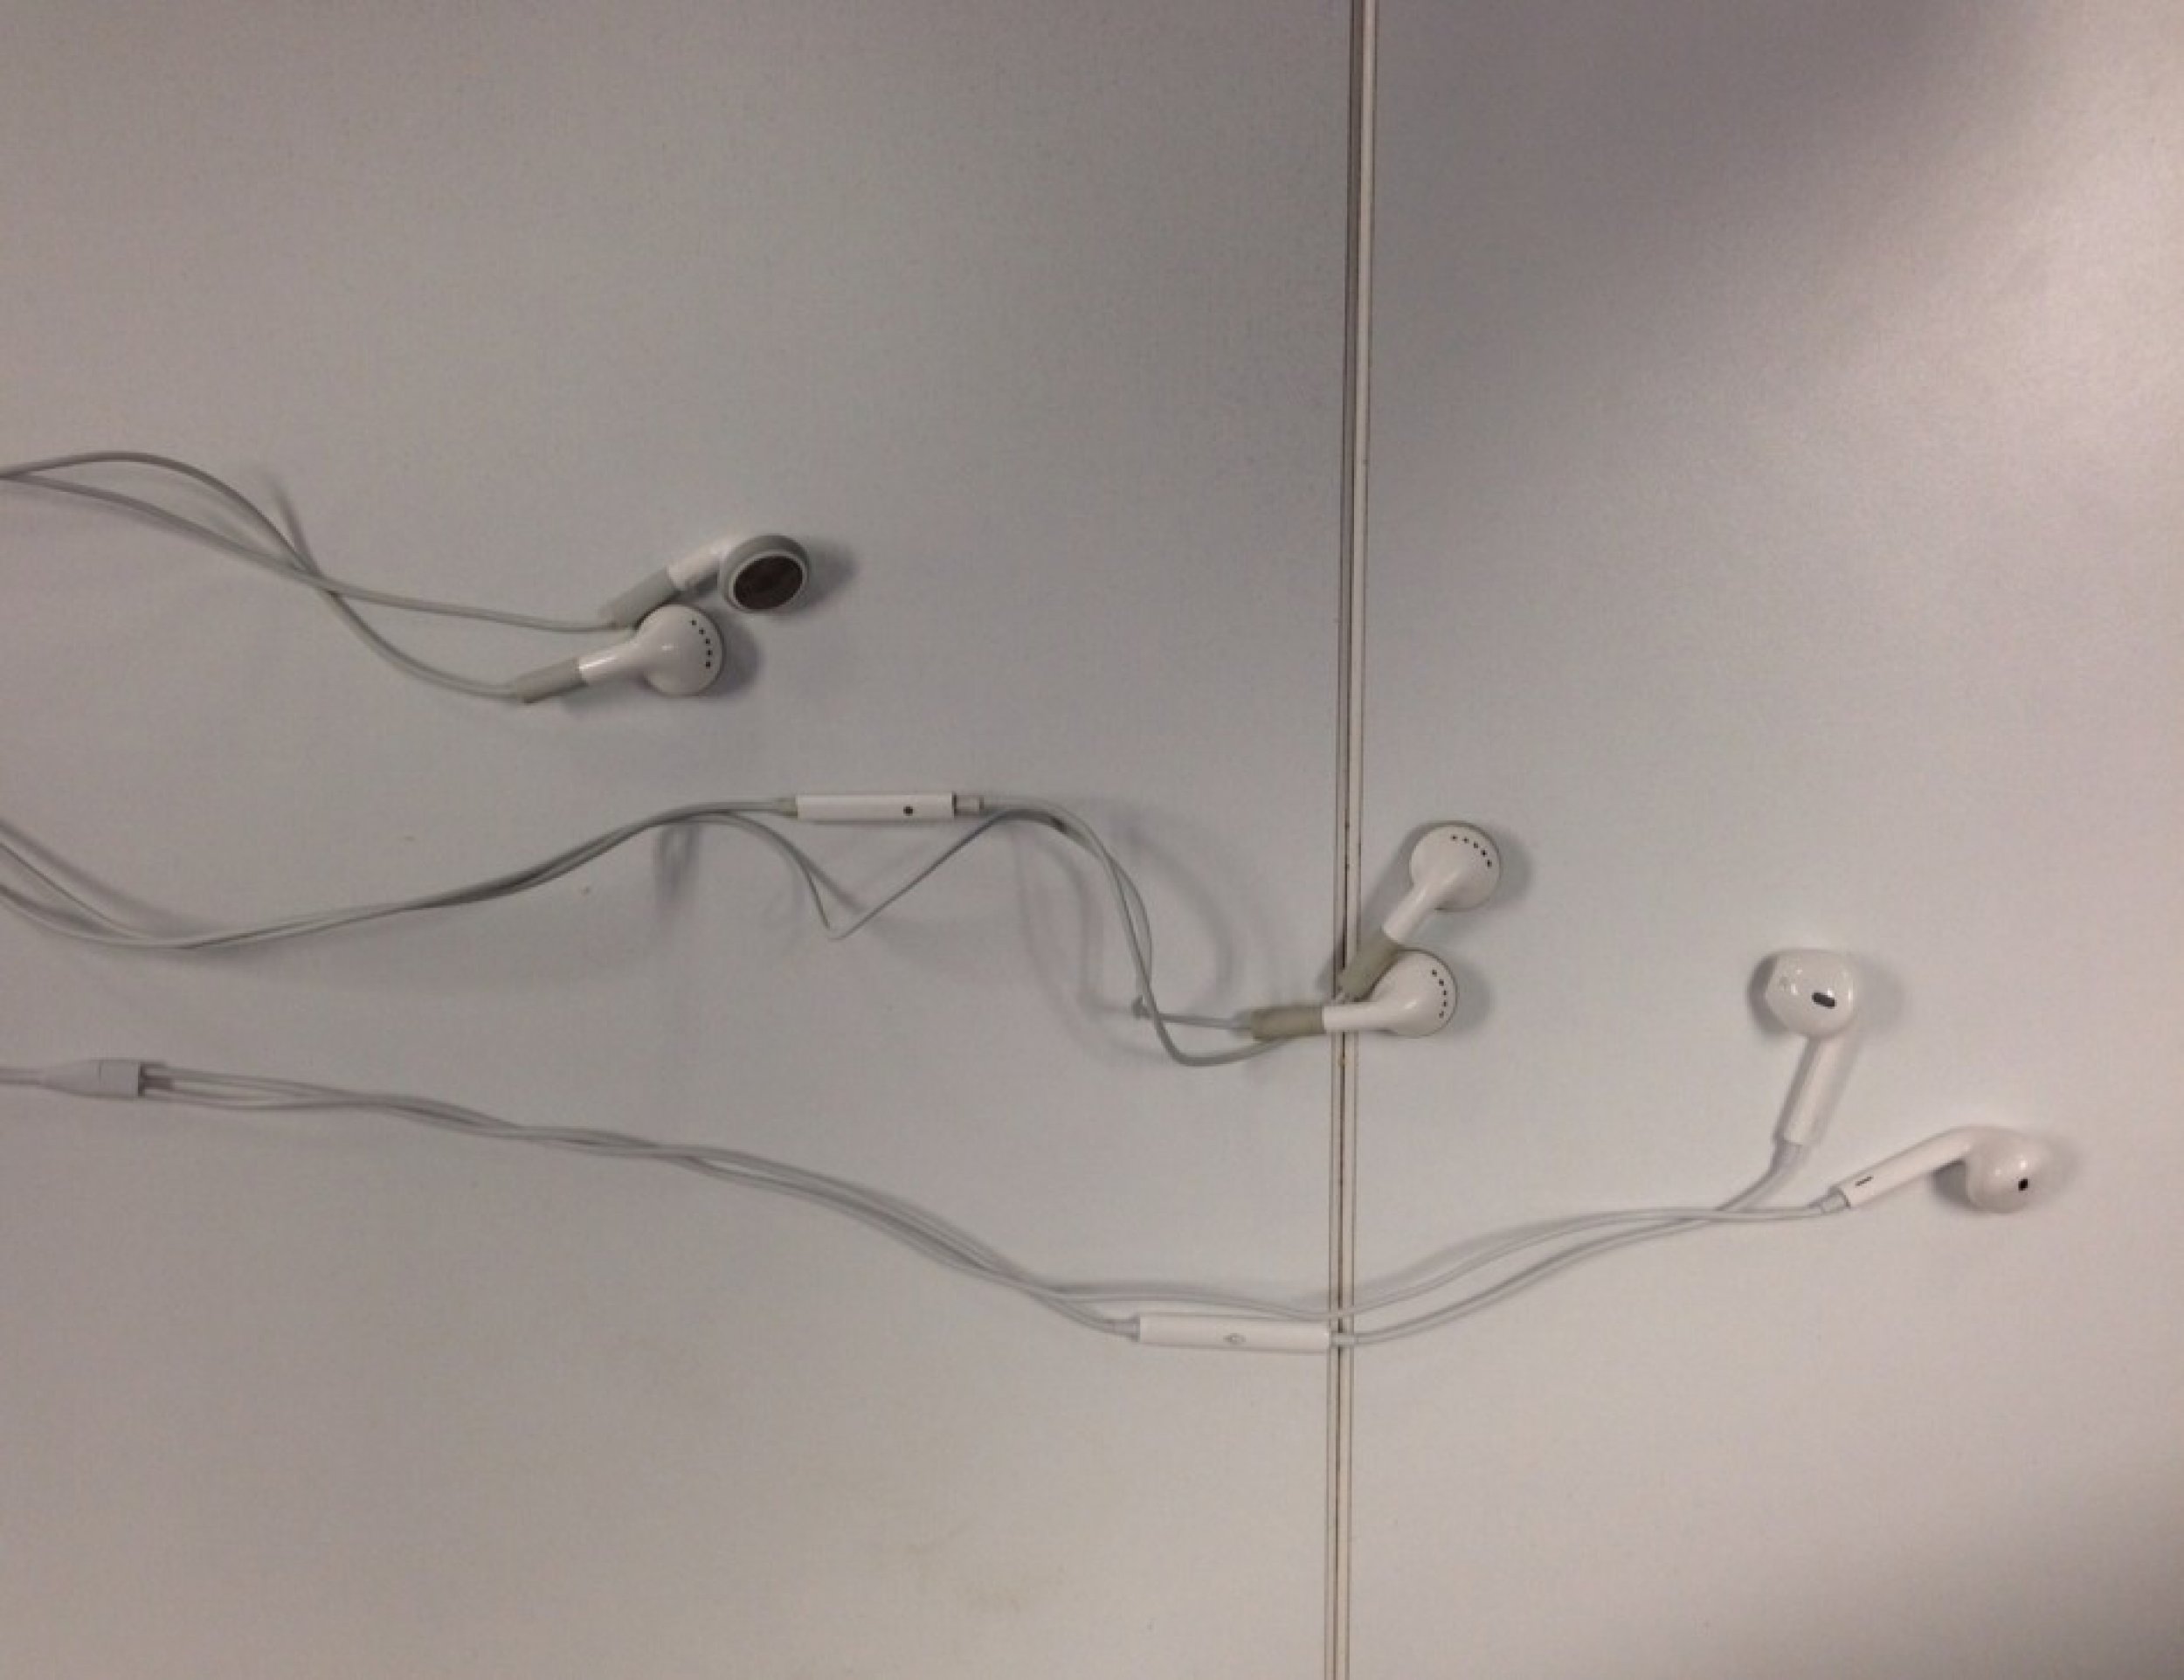 Apple EarPods Review Earbuds, We Hardly Miss Ye UNBOXING PHOTOS  VIDEO